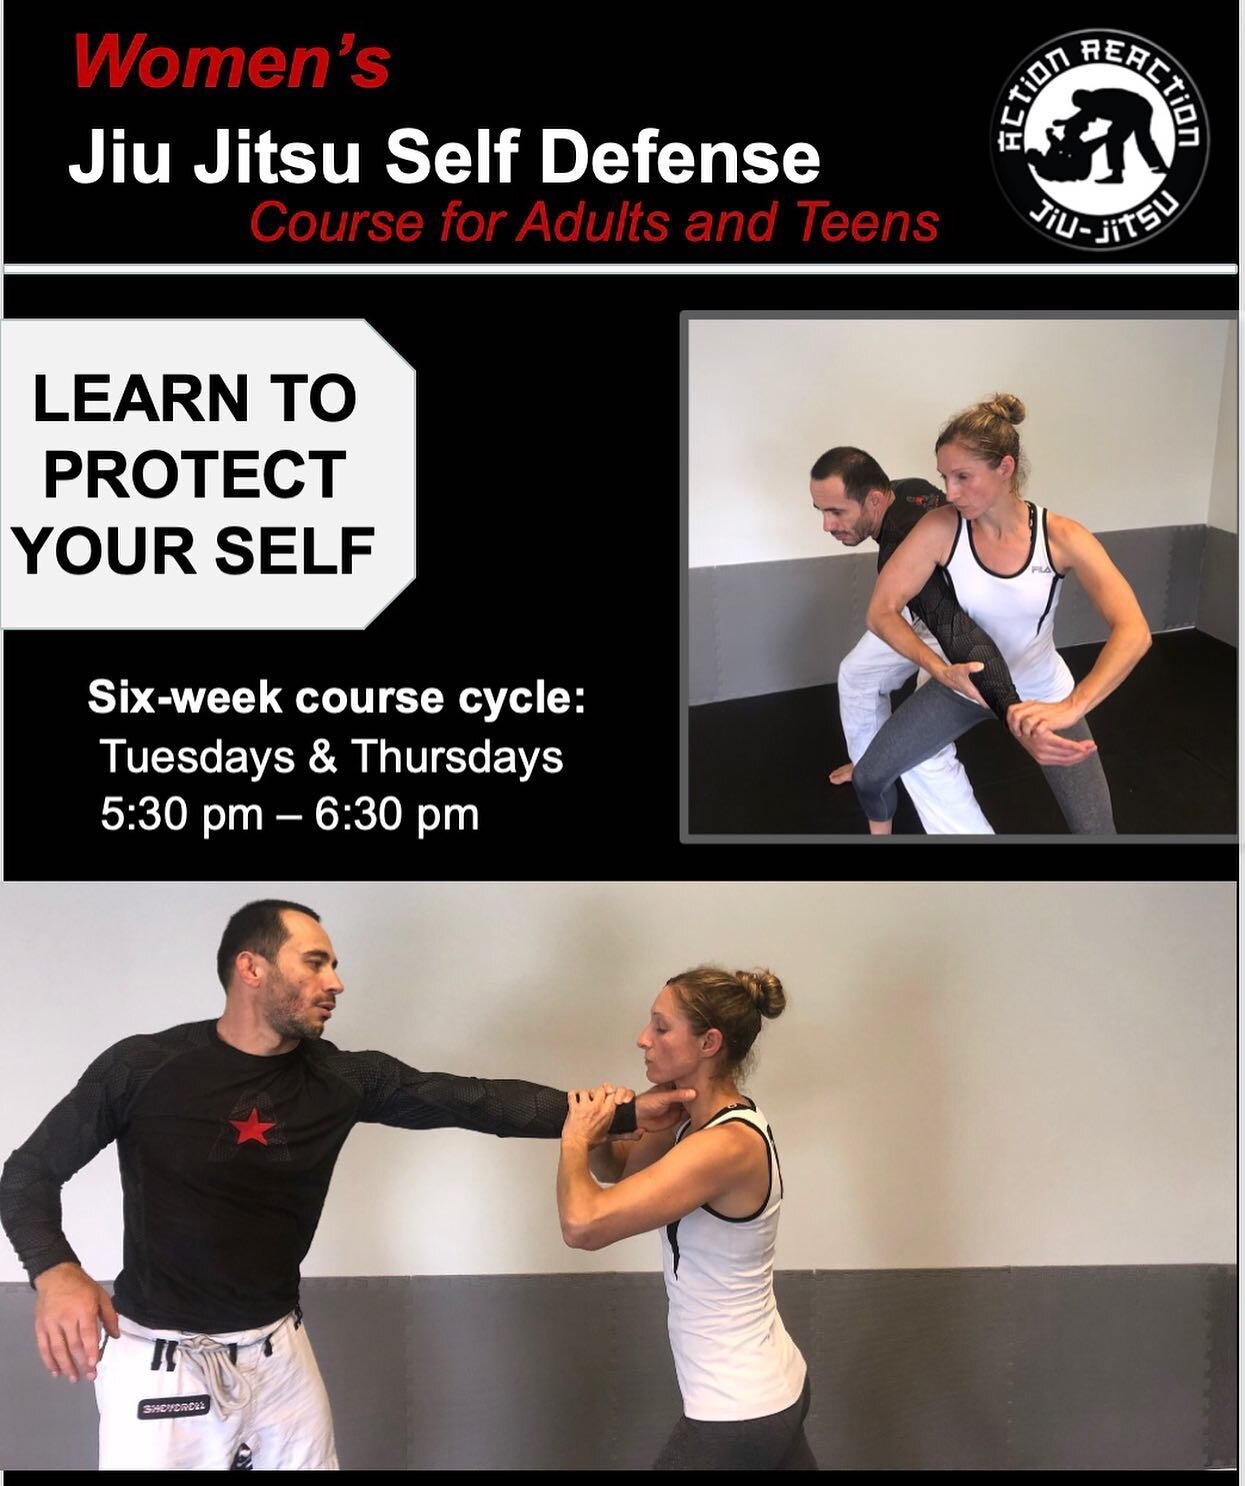 Calling all Women Warriors!!
Action Reaction is now offering a women&rsquo;s jiu jitsu self defense program for women. Techniques taught in the Women Warriors program are specific to women, using leverage, technique, and timing to work against larger